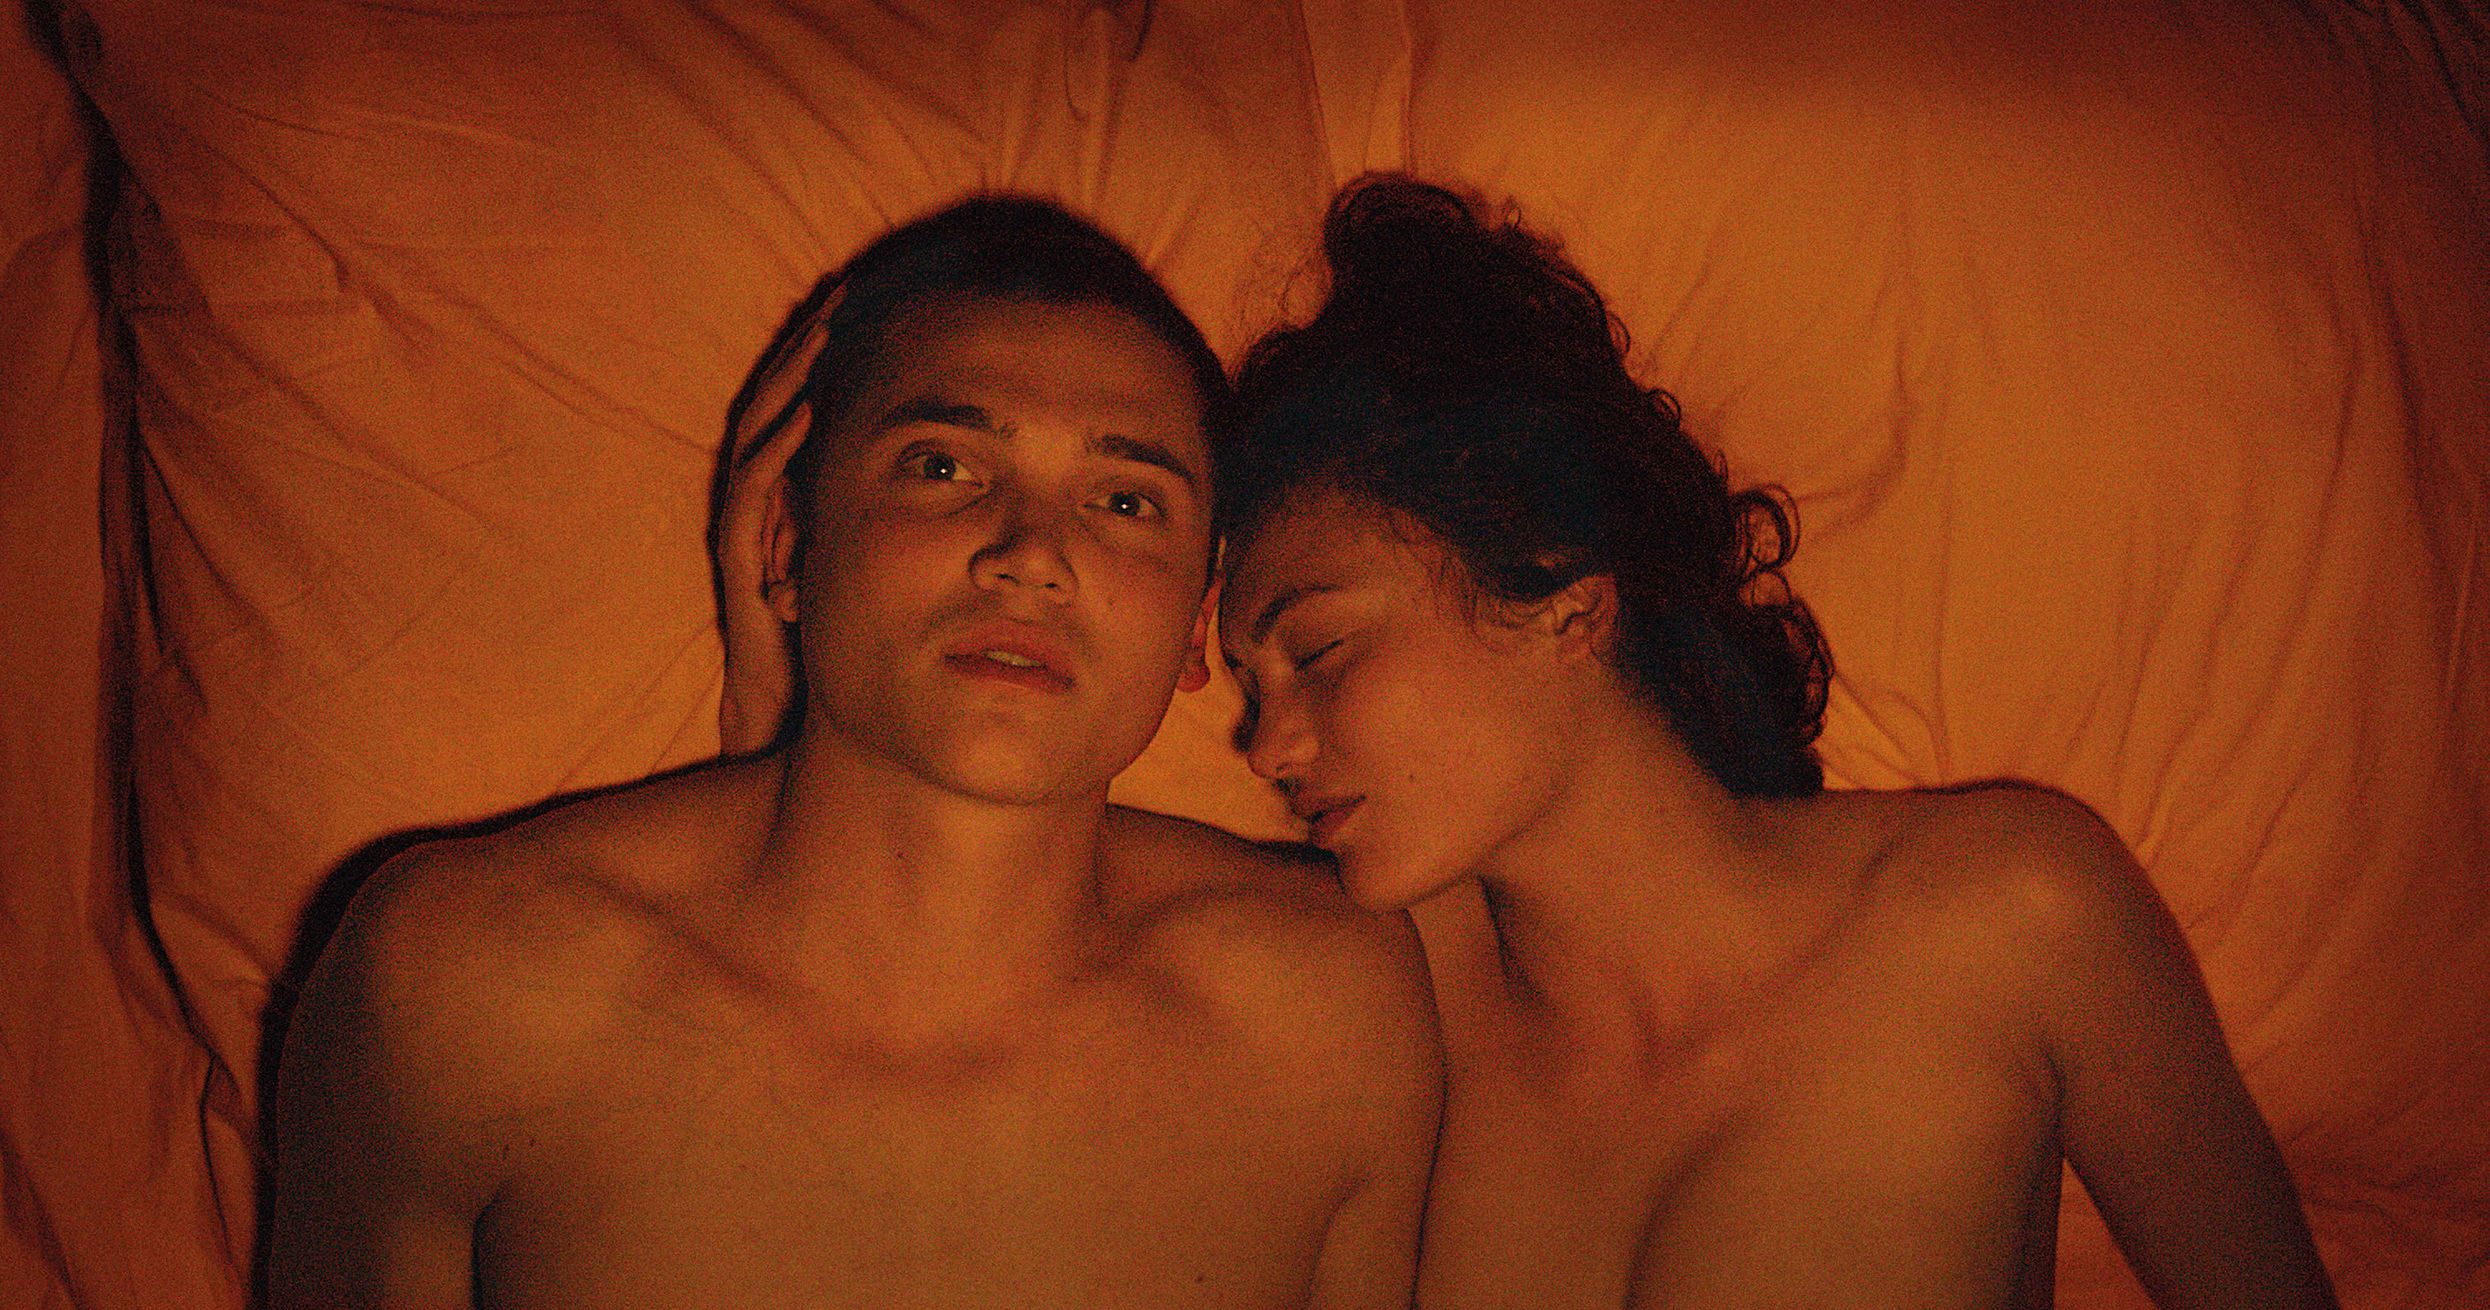 Love, 2015. Nothing is left to the imagination in director Gaspar Noé’s new film, which is remarkable for being released in 3-D.One reviewer, Ignatiy Vishnevetsky, wrote that “There’s a difference between being naked before an audience and showing them your d*ck, and Noé does the latter—very literally, in close-up and 3-D.”